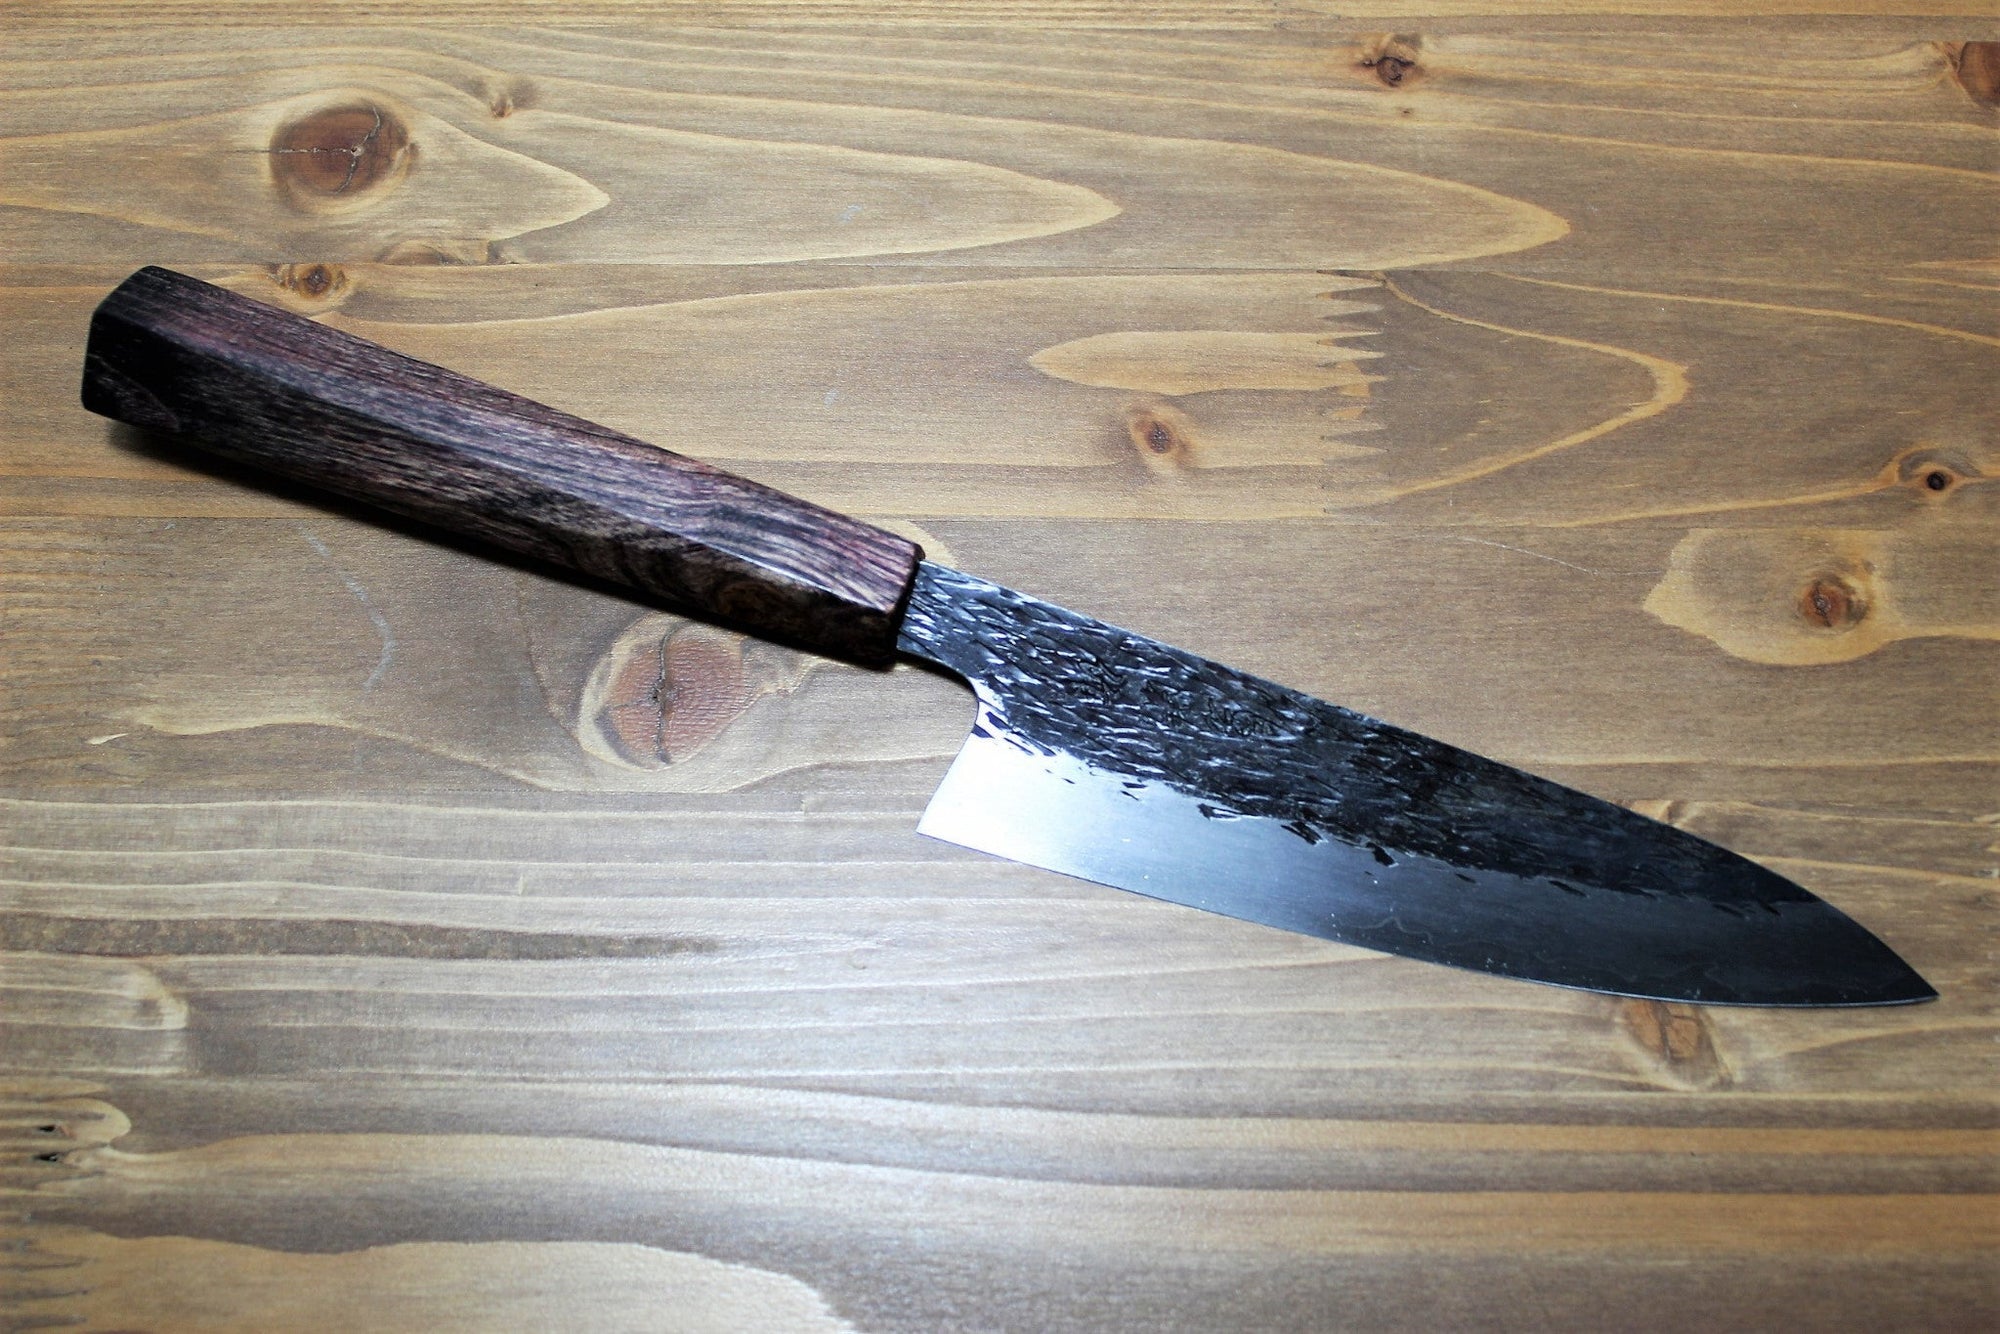 Kitchen Knives - Isamitsu Aogami Super / Blue Super Steel Petty 135 Mm / 5.3" Brown Burberry Wood Handle